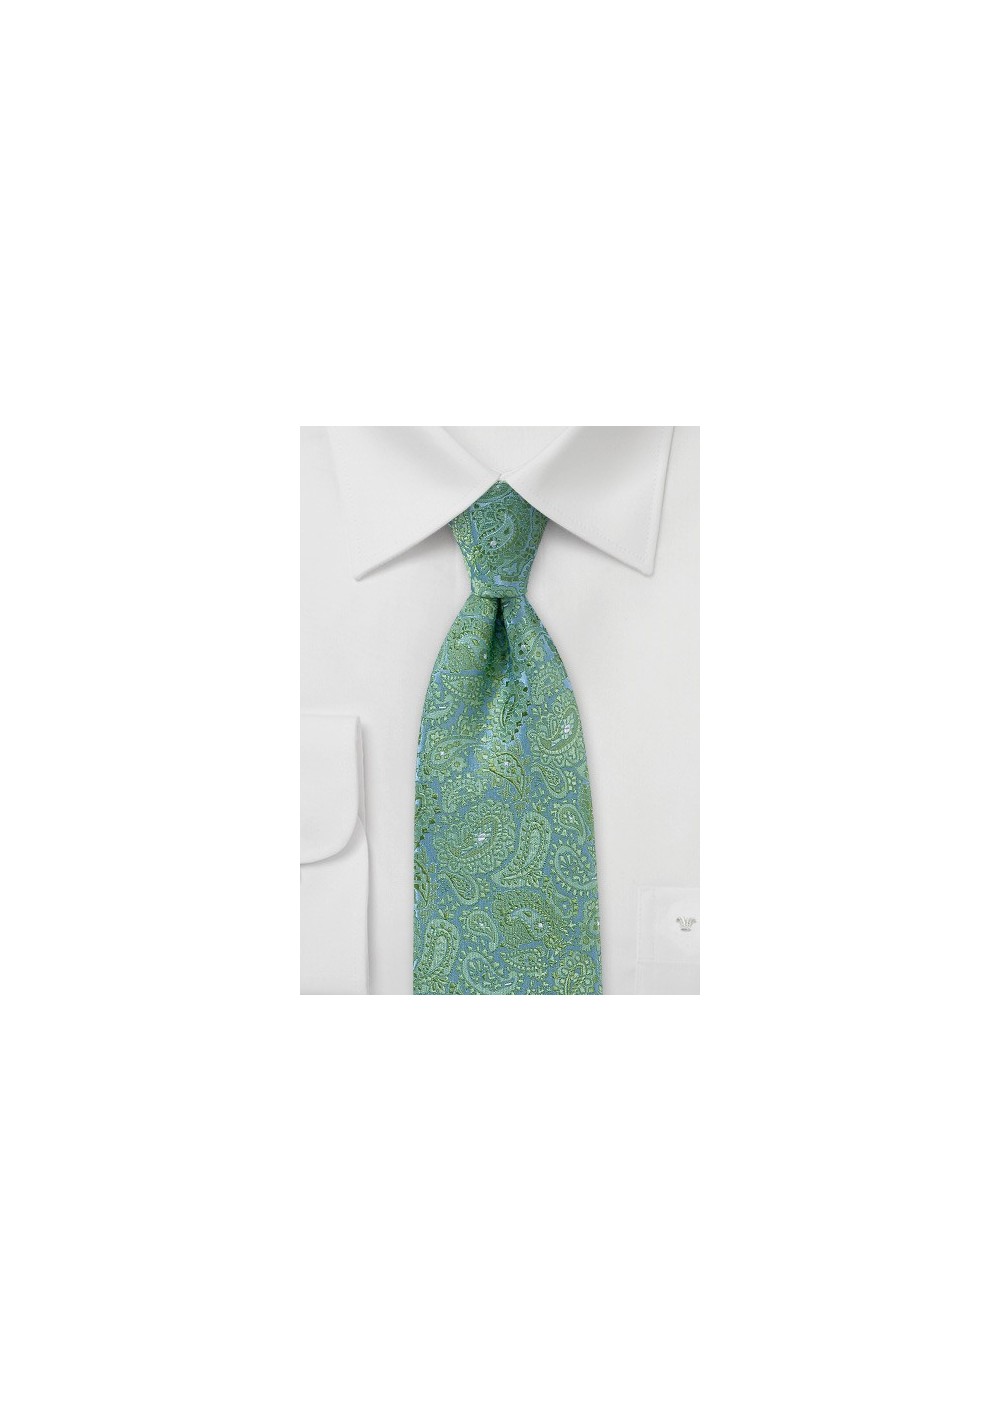 Fresh Paisley Tie in Light Greens and Blues